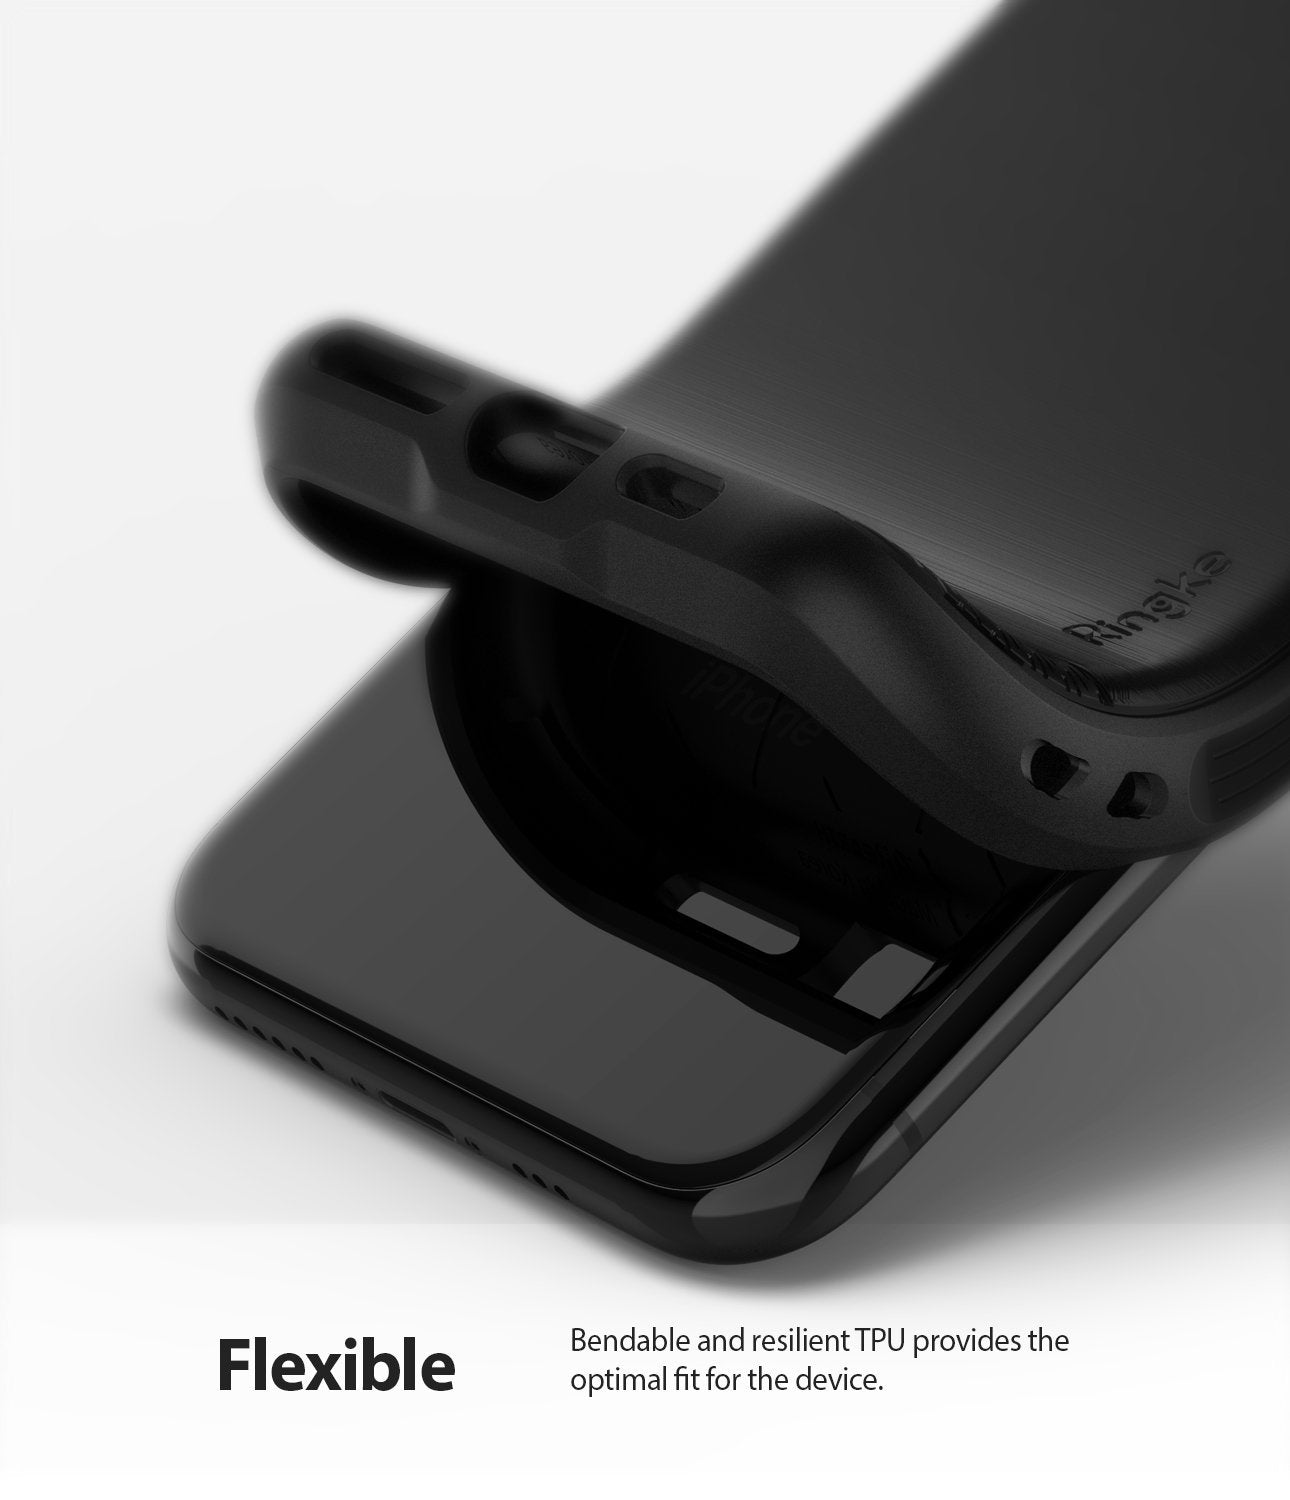 Ringke Onyx Case compatible with iPhone 11 Pro Max Black flexible material